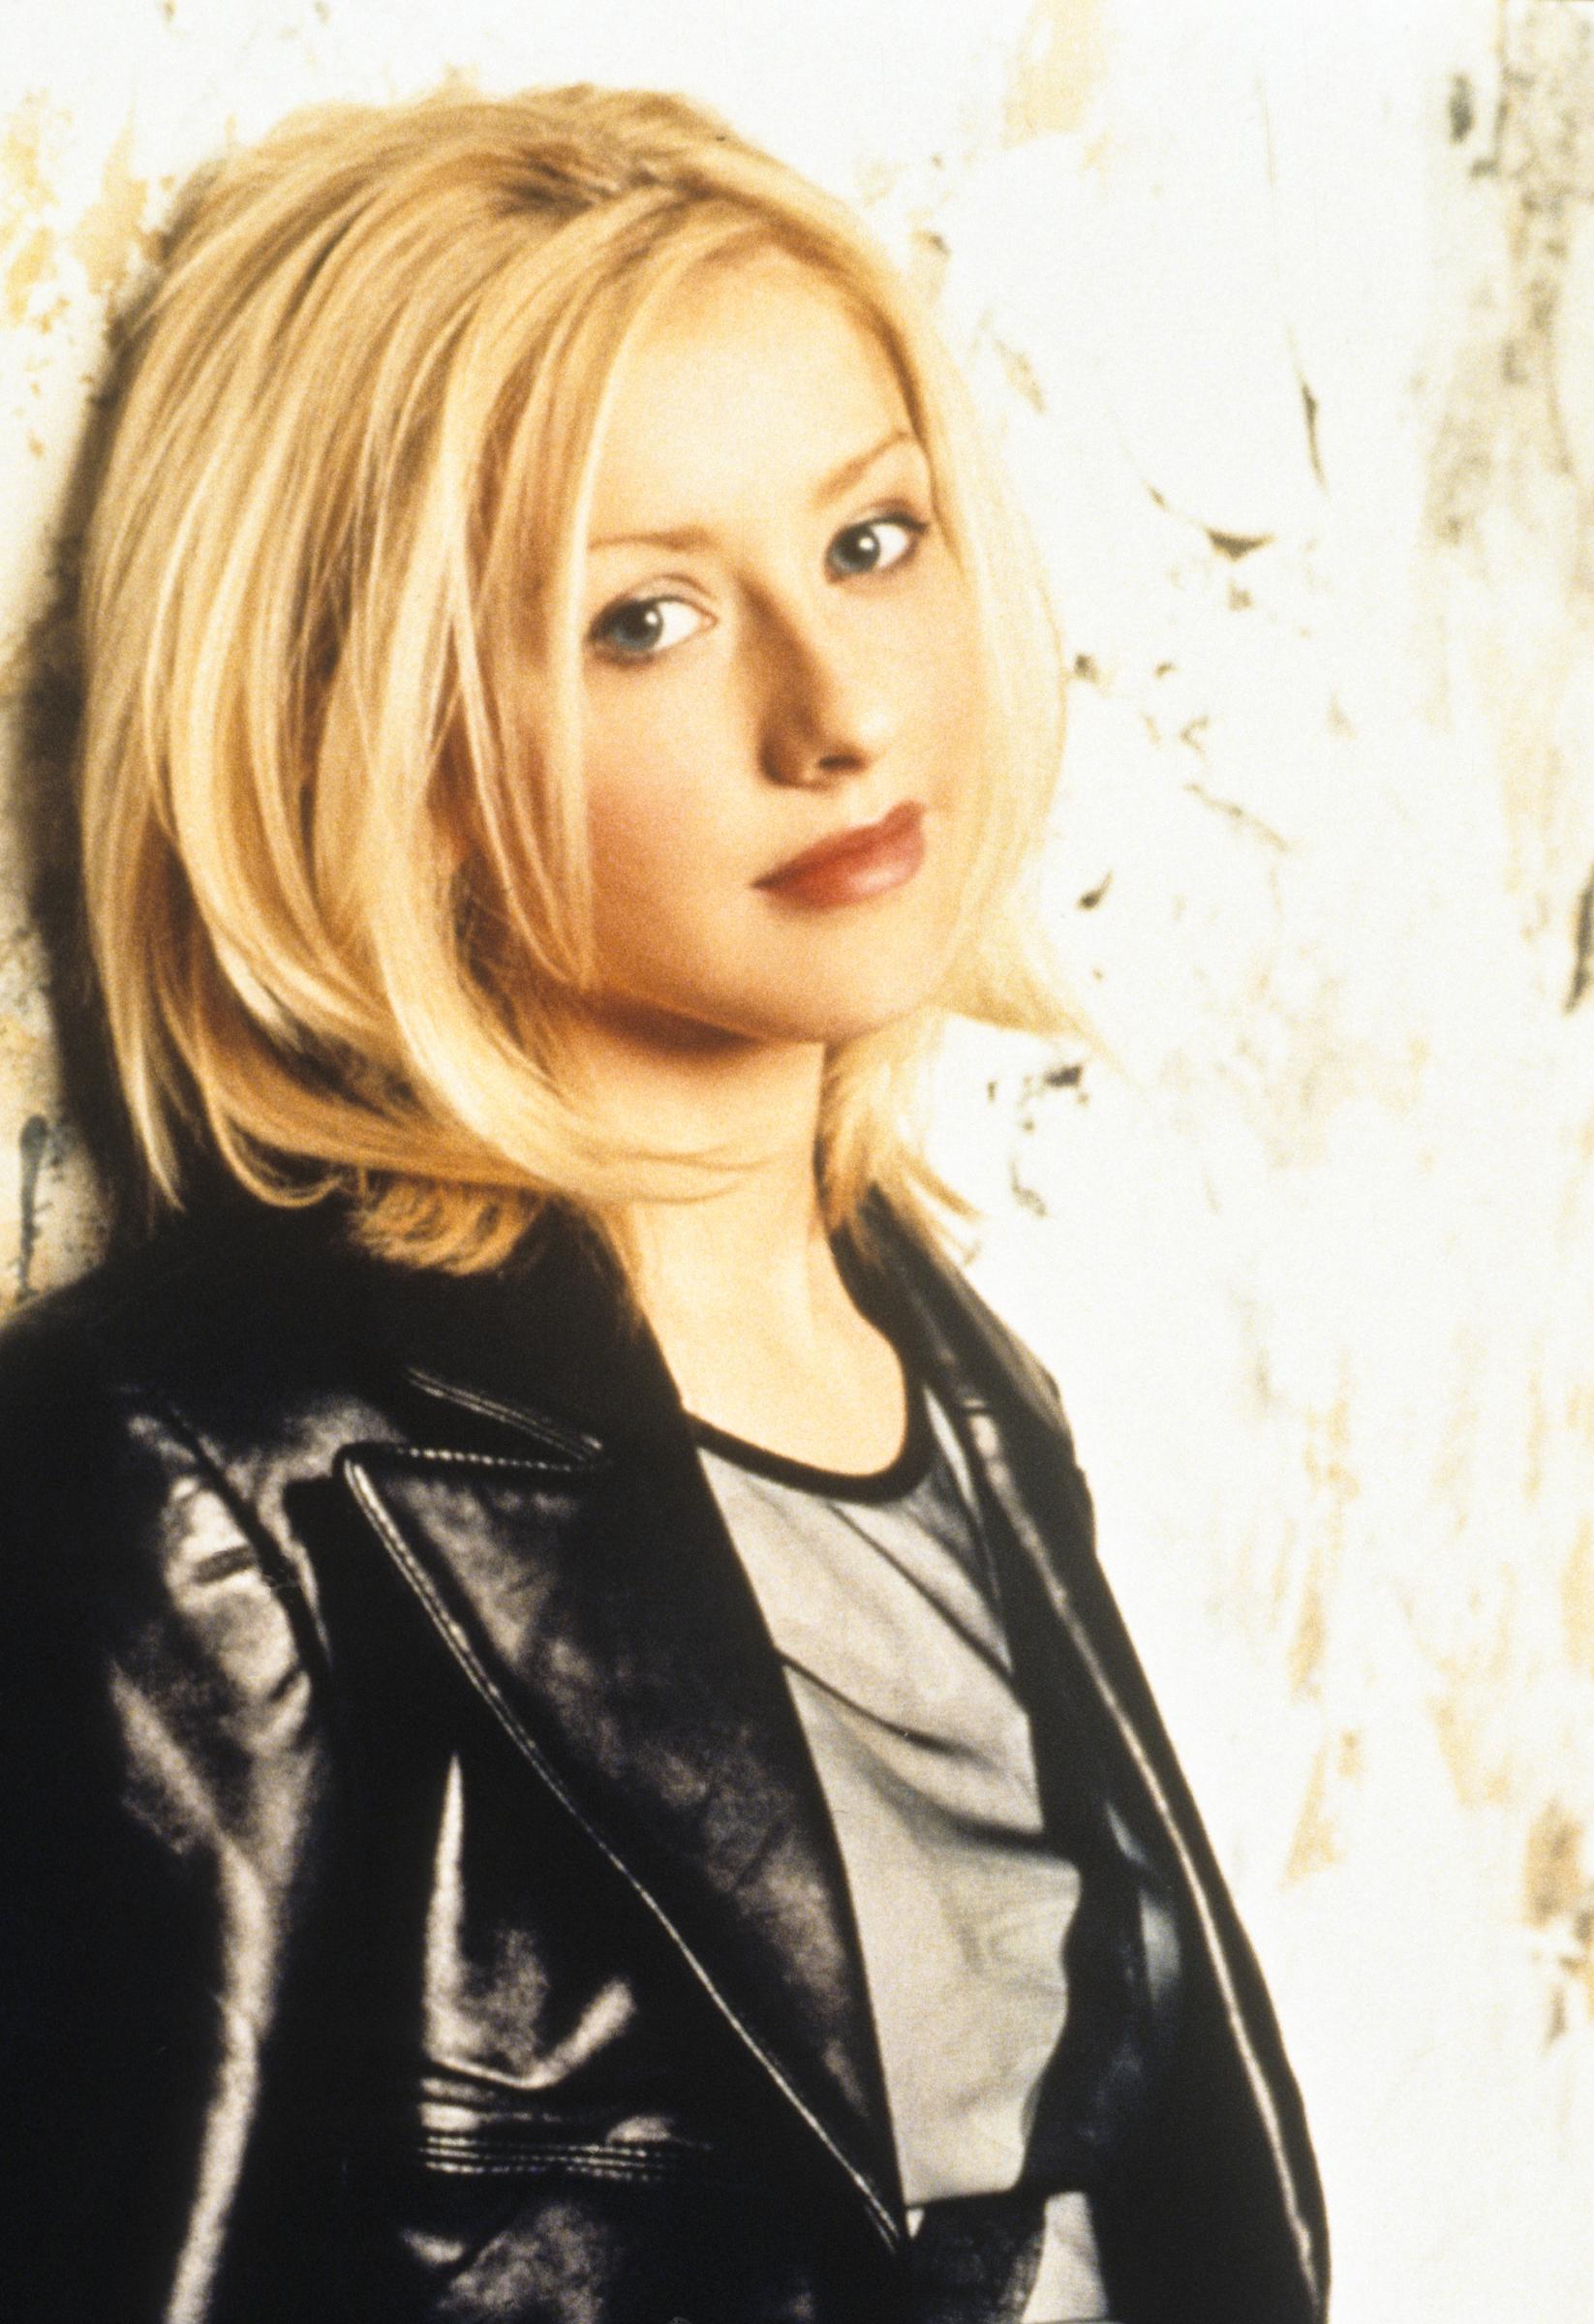 An undated image of Christina Aguilera | Source: Getty Images